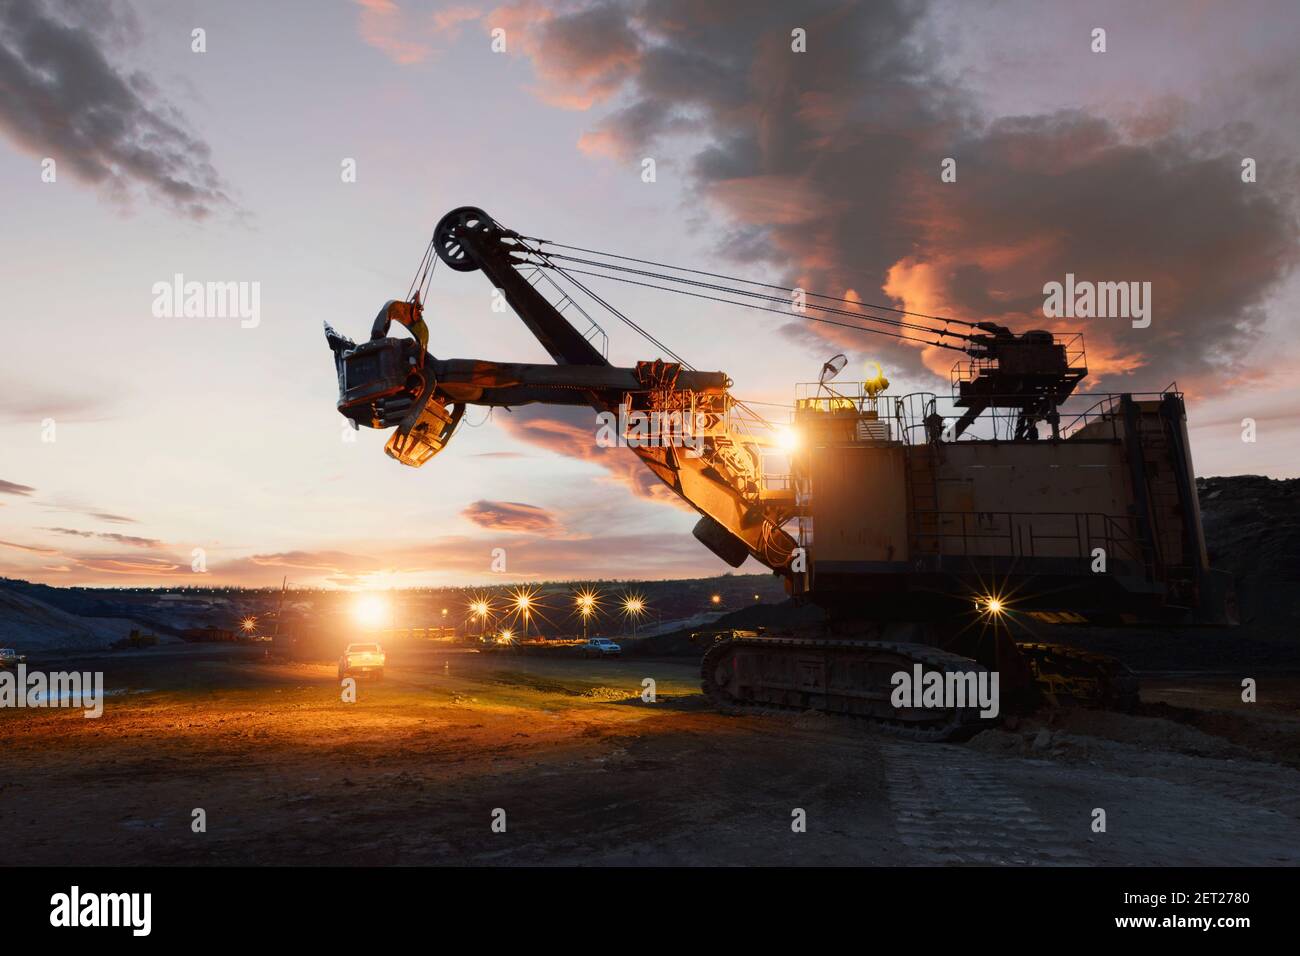 Silhouette of a mechanical digger at an iron ore mine at sunset, Thailand Stock Photo